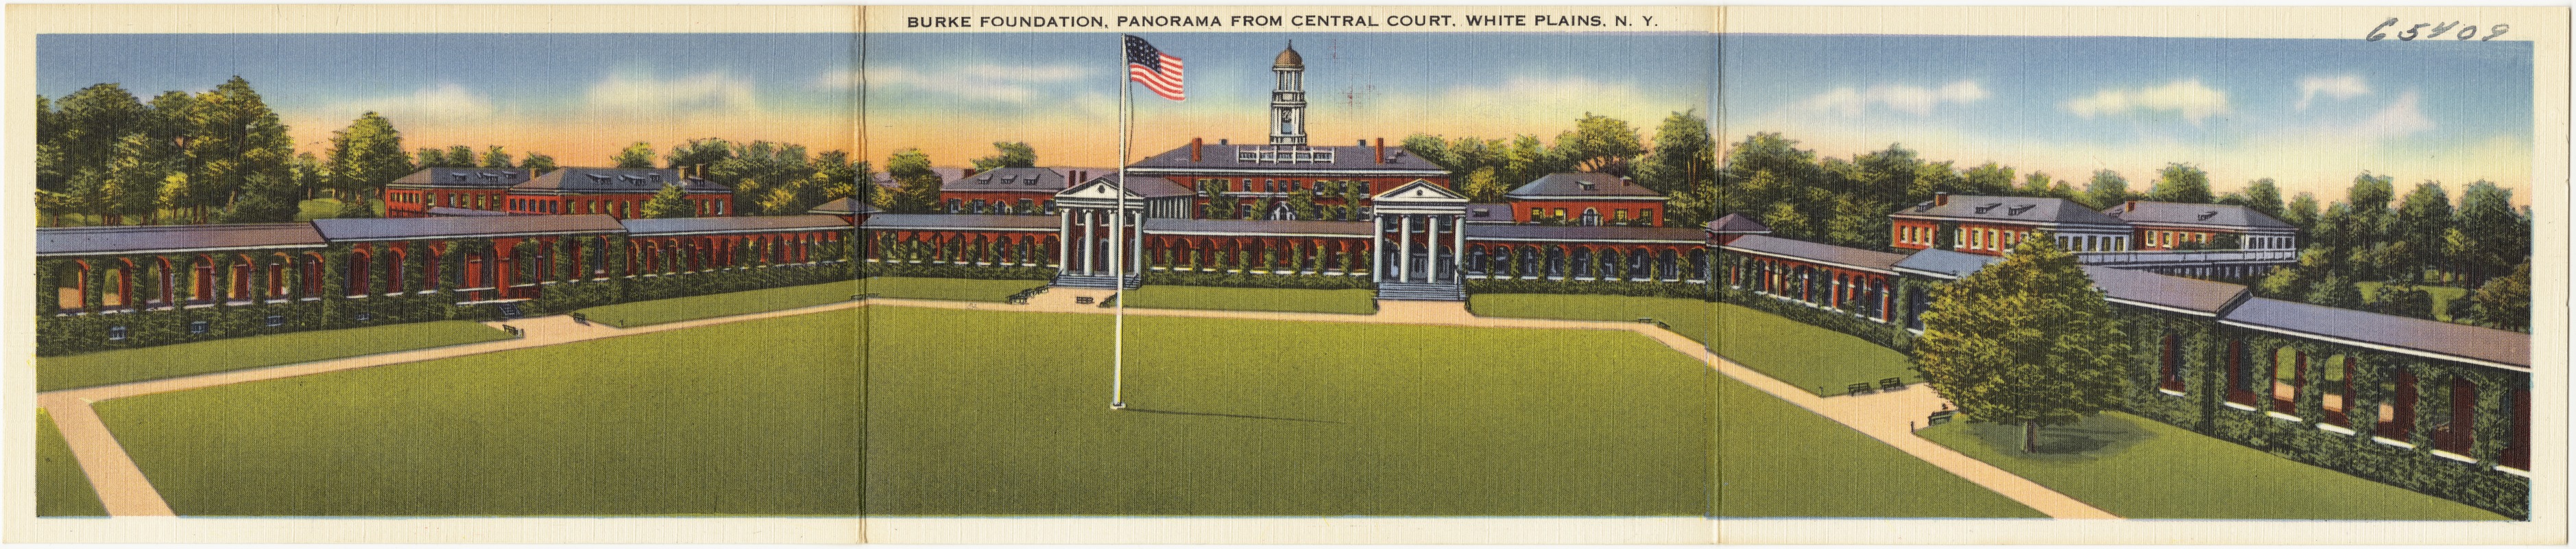 Burke Foundation, panorama from central court, White Plains, N. Y.